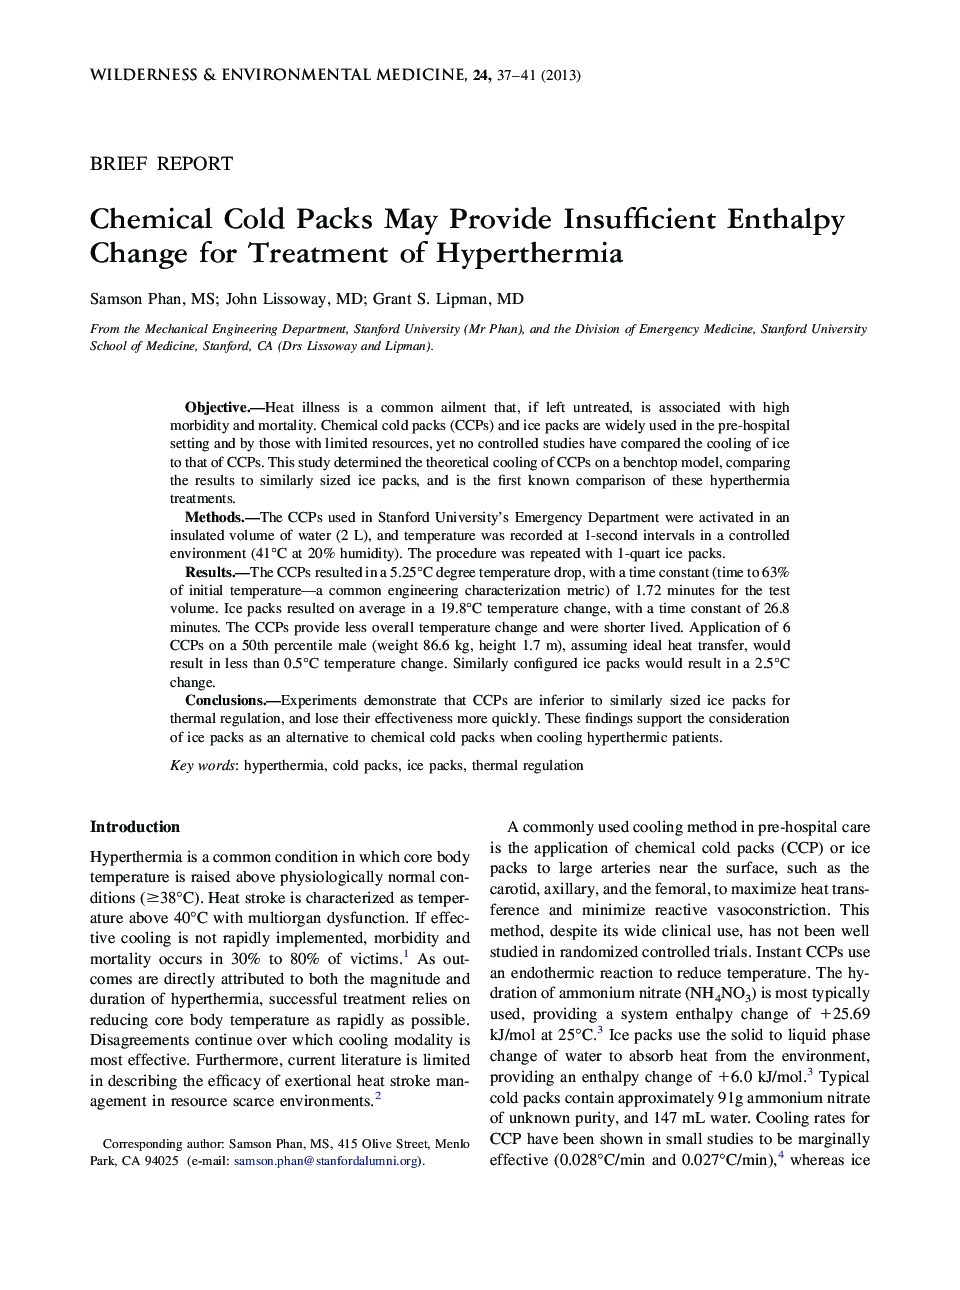 Chemical Cold Packs May Provide Insufficient Enthalpy Change for Treatment of Hyperthermia